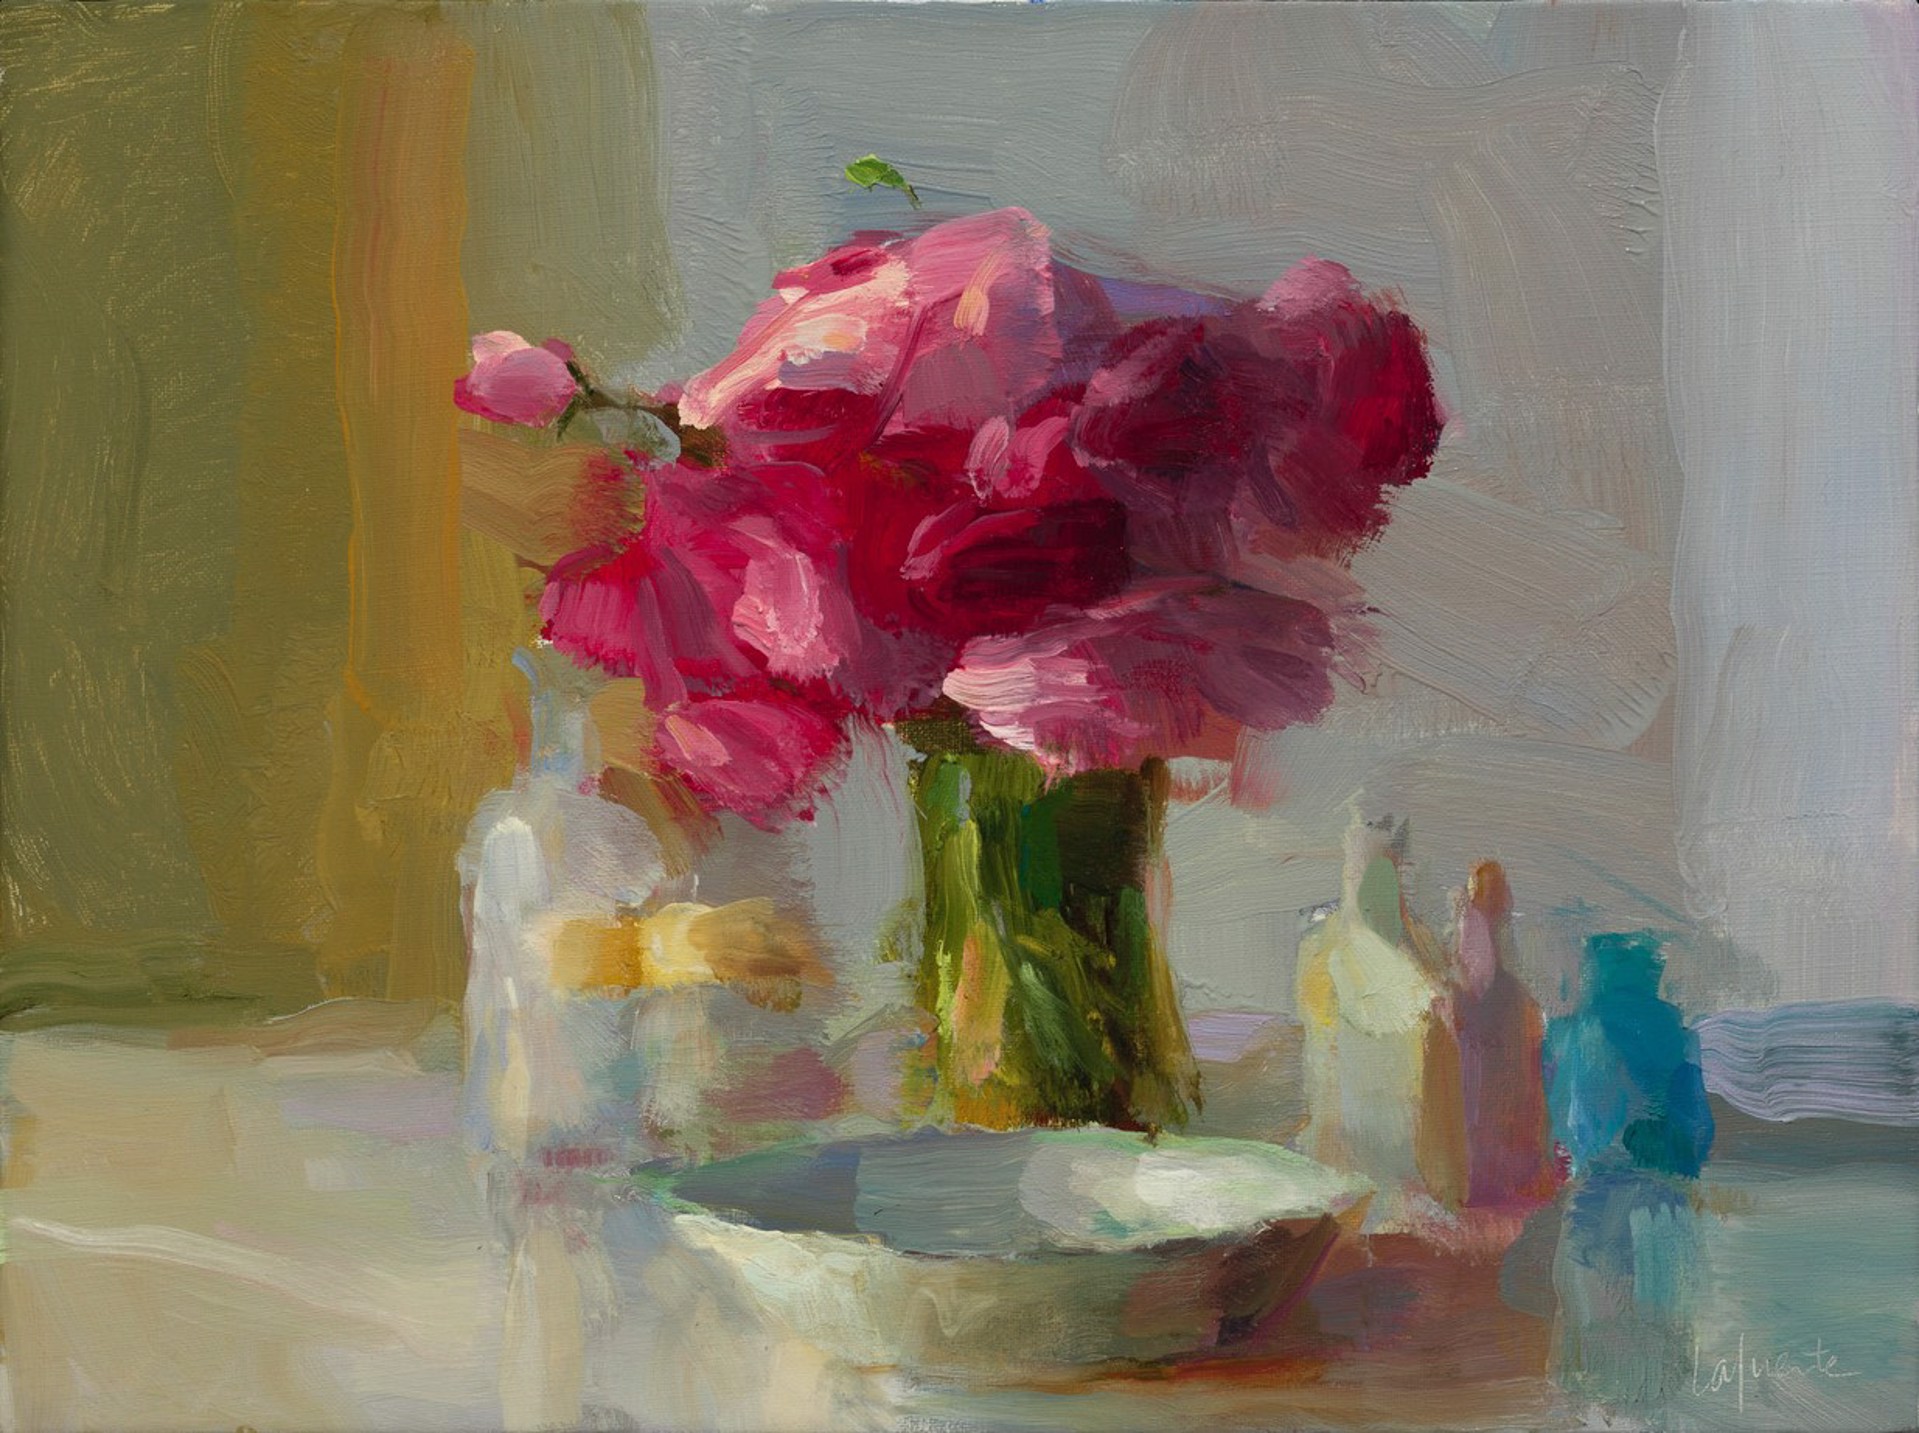 PINK RANUNCULUS AND BOTTLES by CHRISTINE LAFUENTE